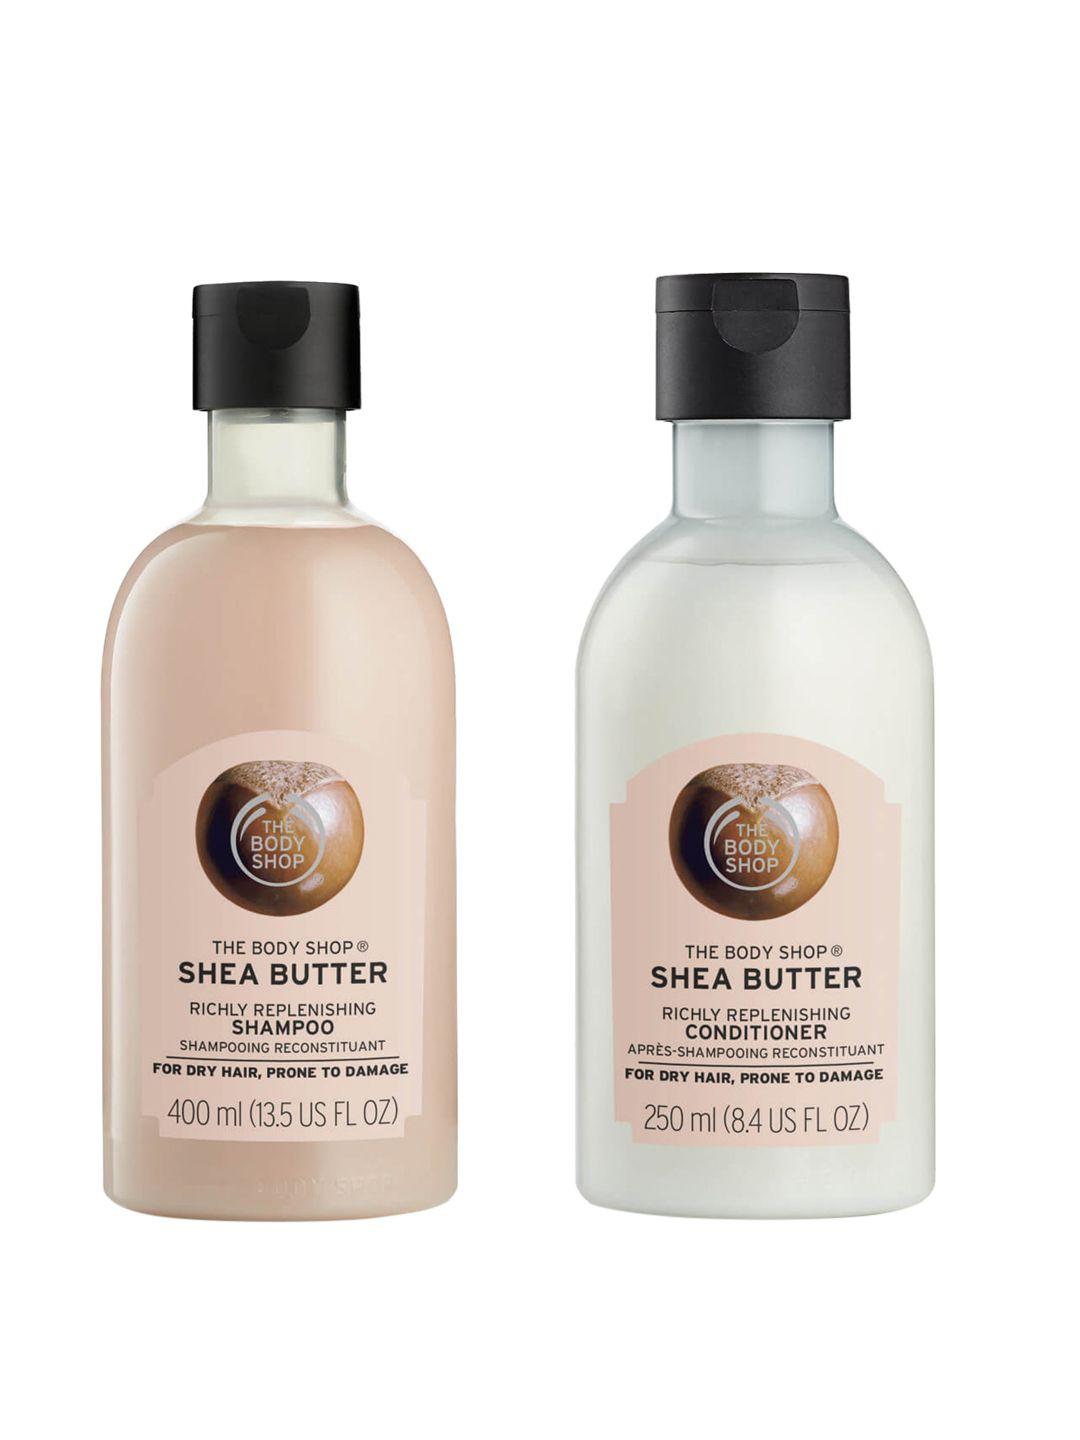 the body shop unisex set of shea butter richly replenishing shampoo & conditioner